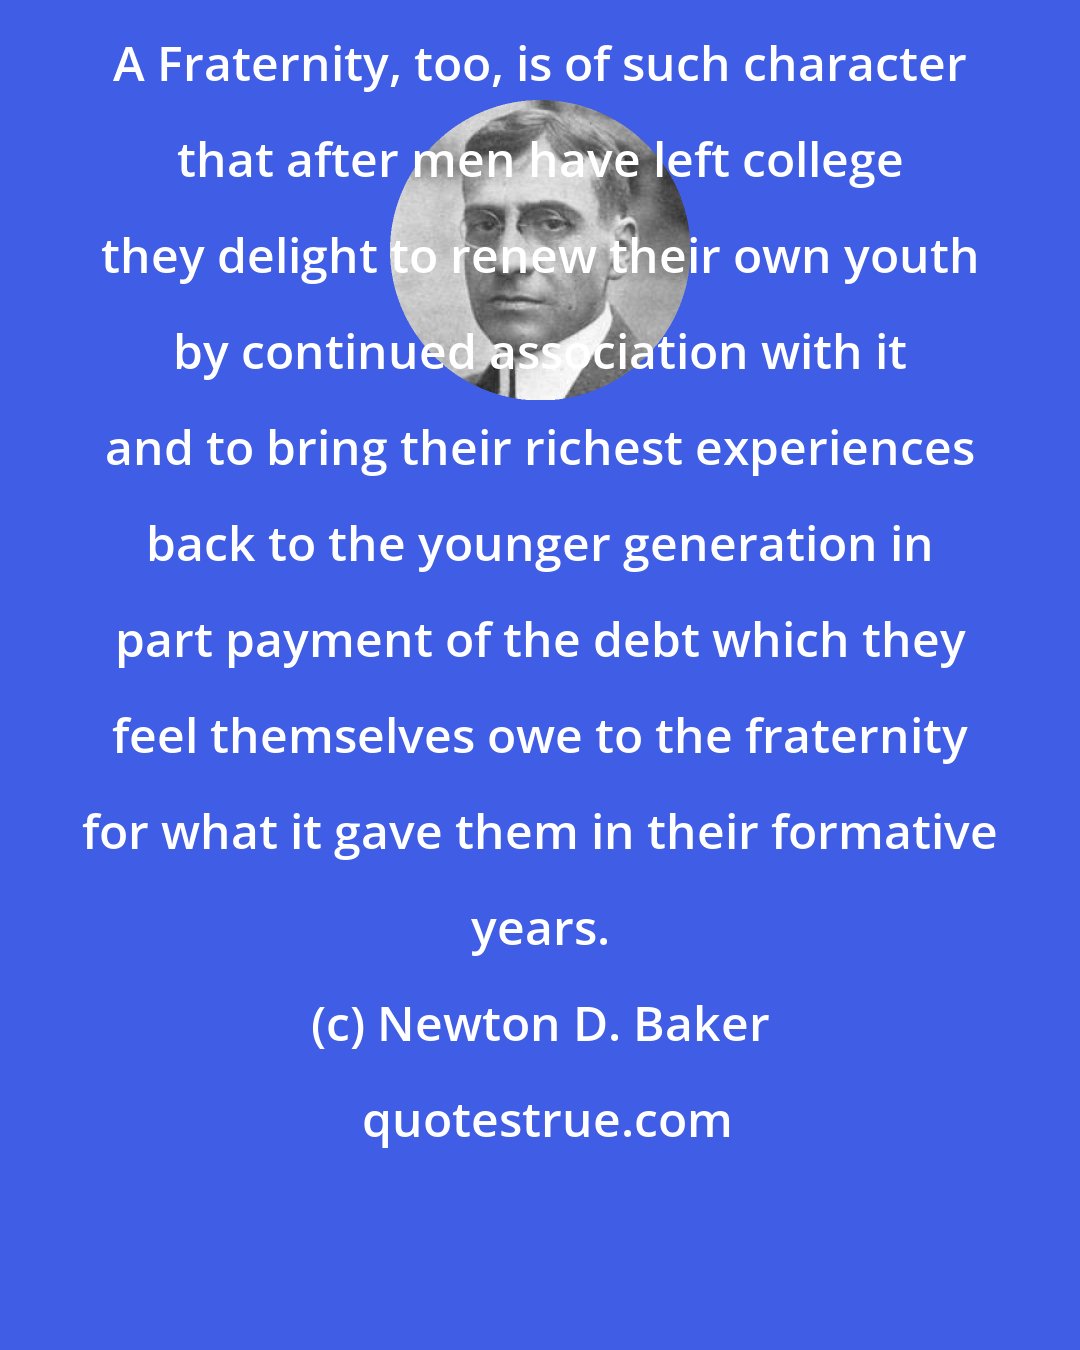 Newton D. Baker: A Fraternity, too, is of such character that after men have left college they delight to renew their own youth by continued association with it and to bring their richest experiences back to the younger generation in part payment of the debt which they feel themselves owe to the fraternity for what it gave them in their formative years.